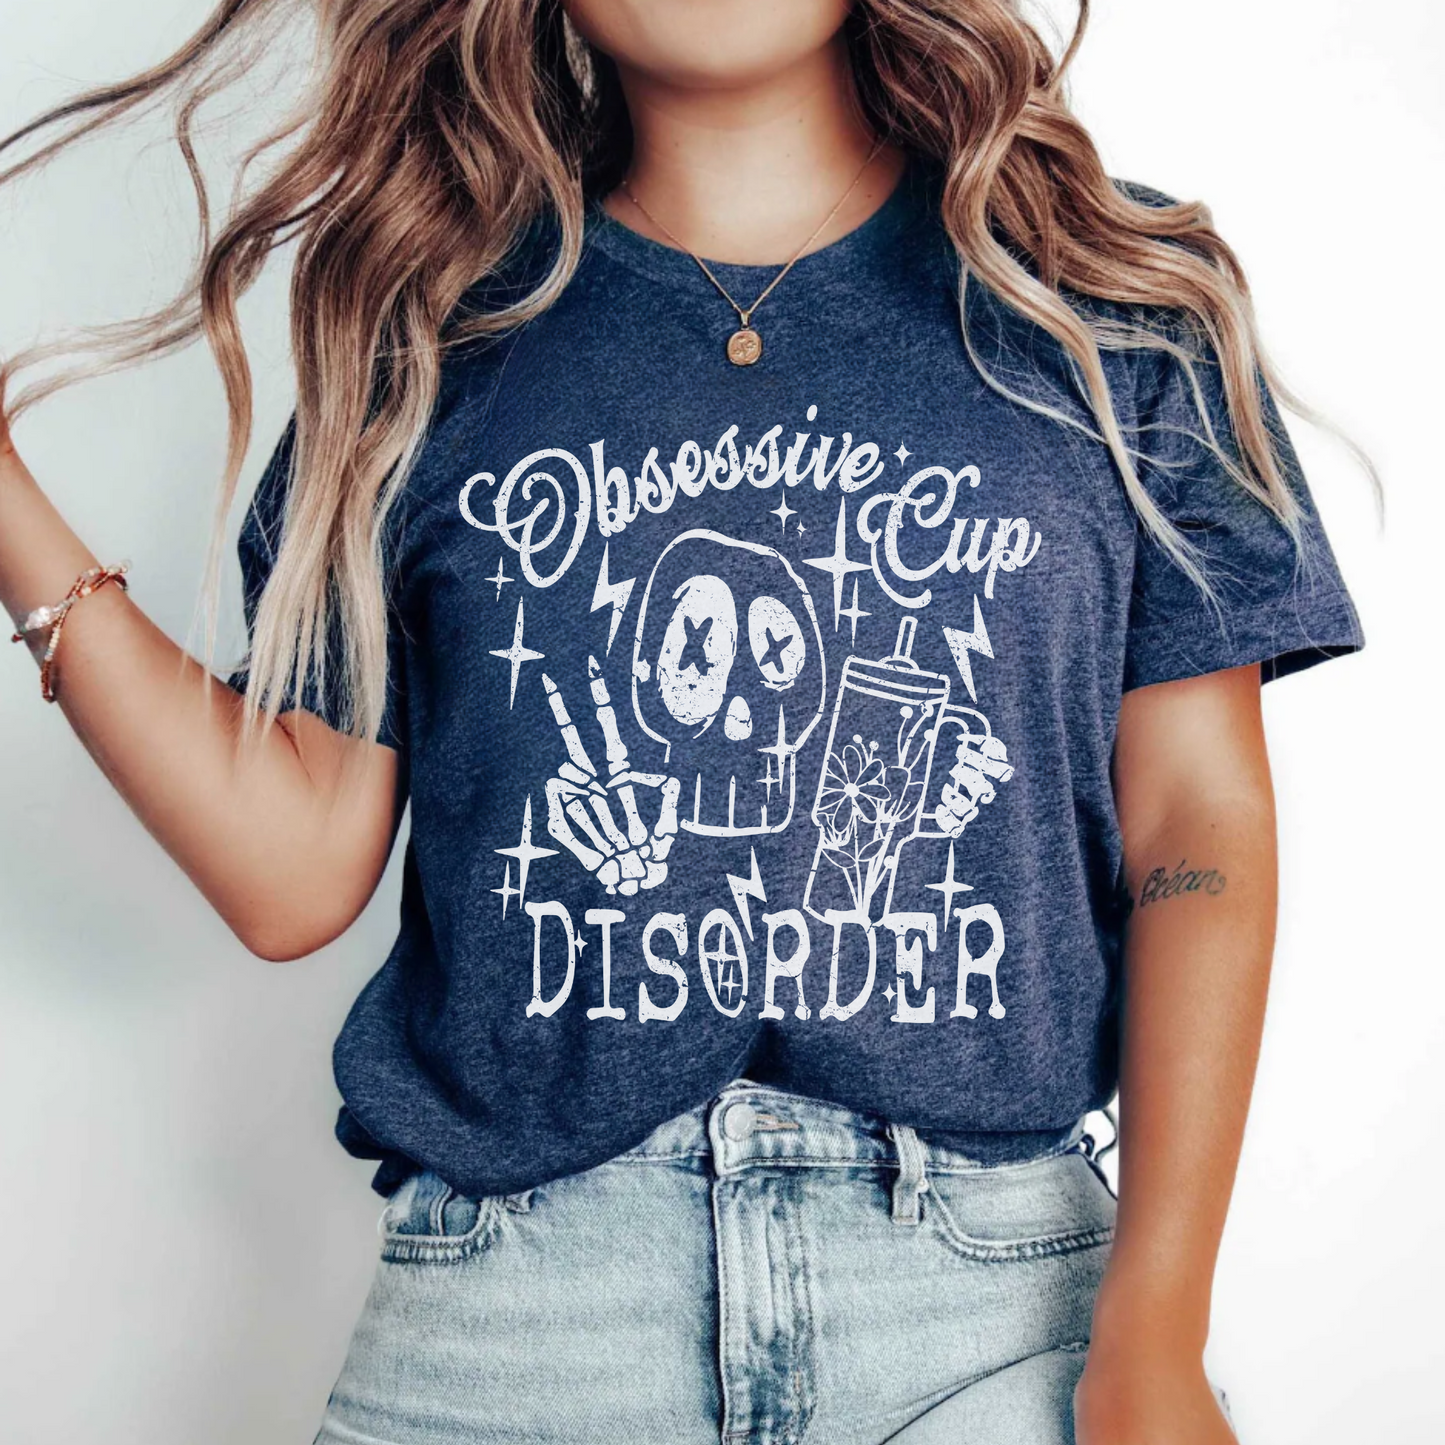 Obsessive Cup Disorder T-Shirt